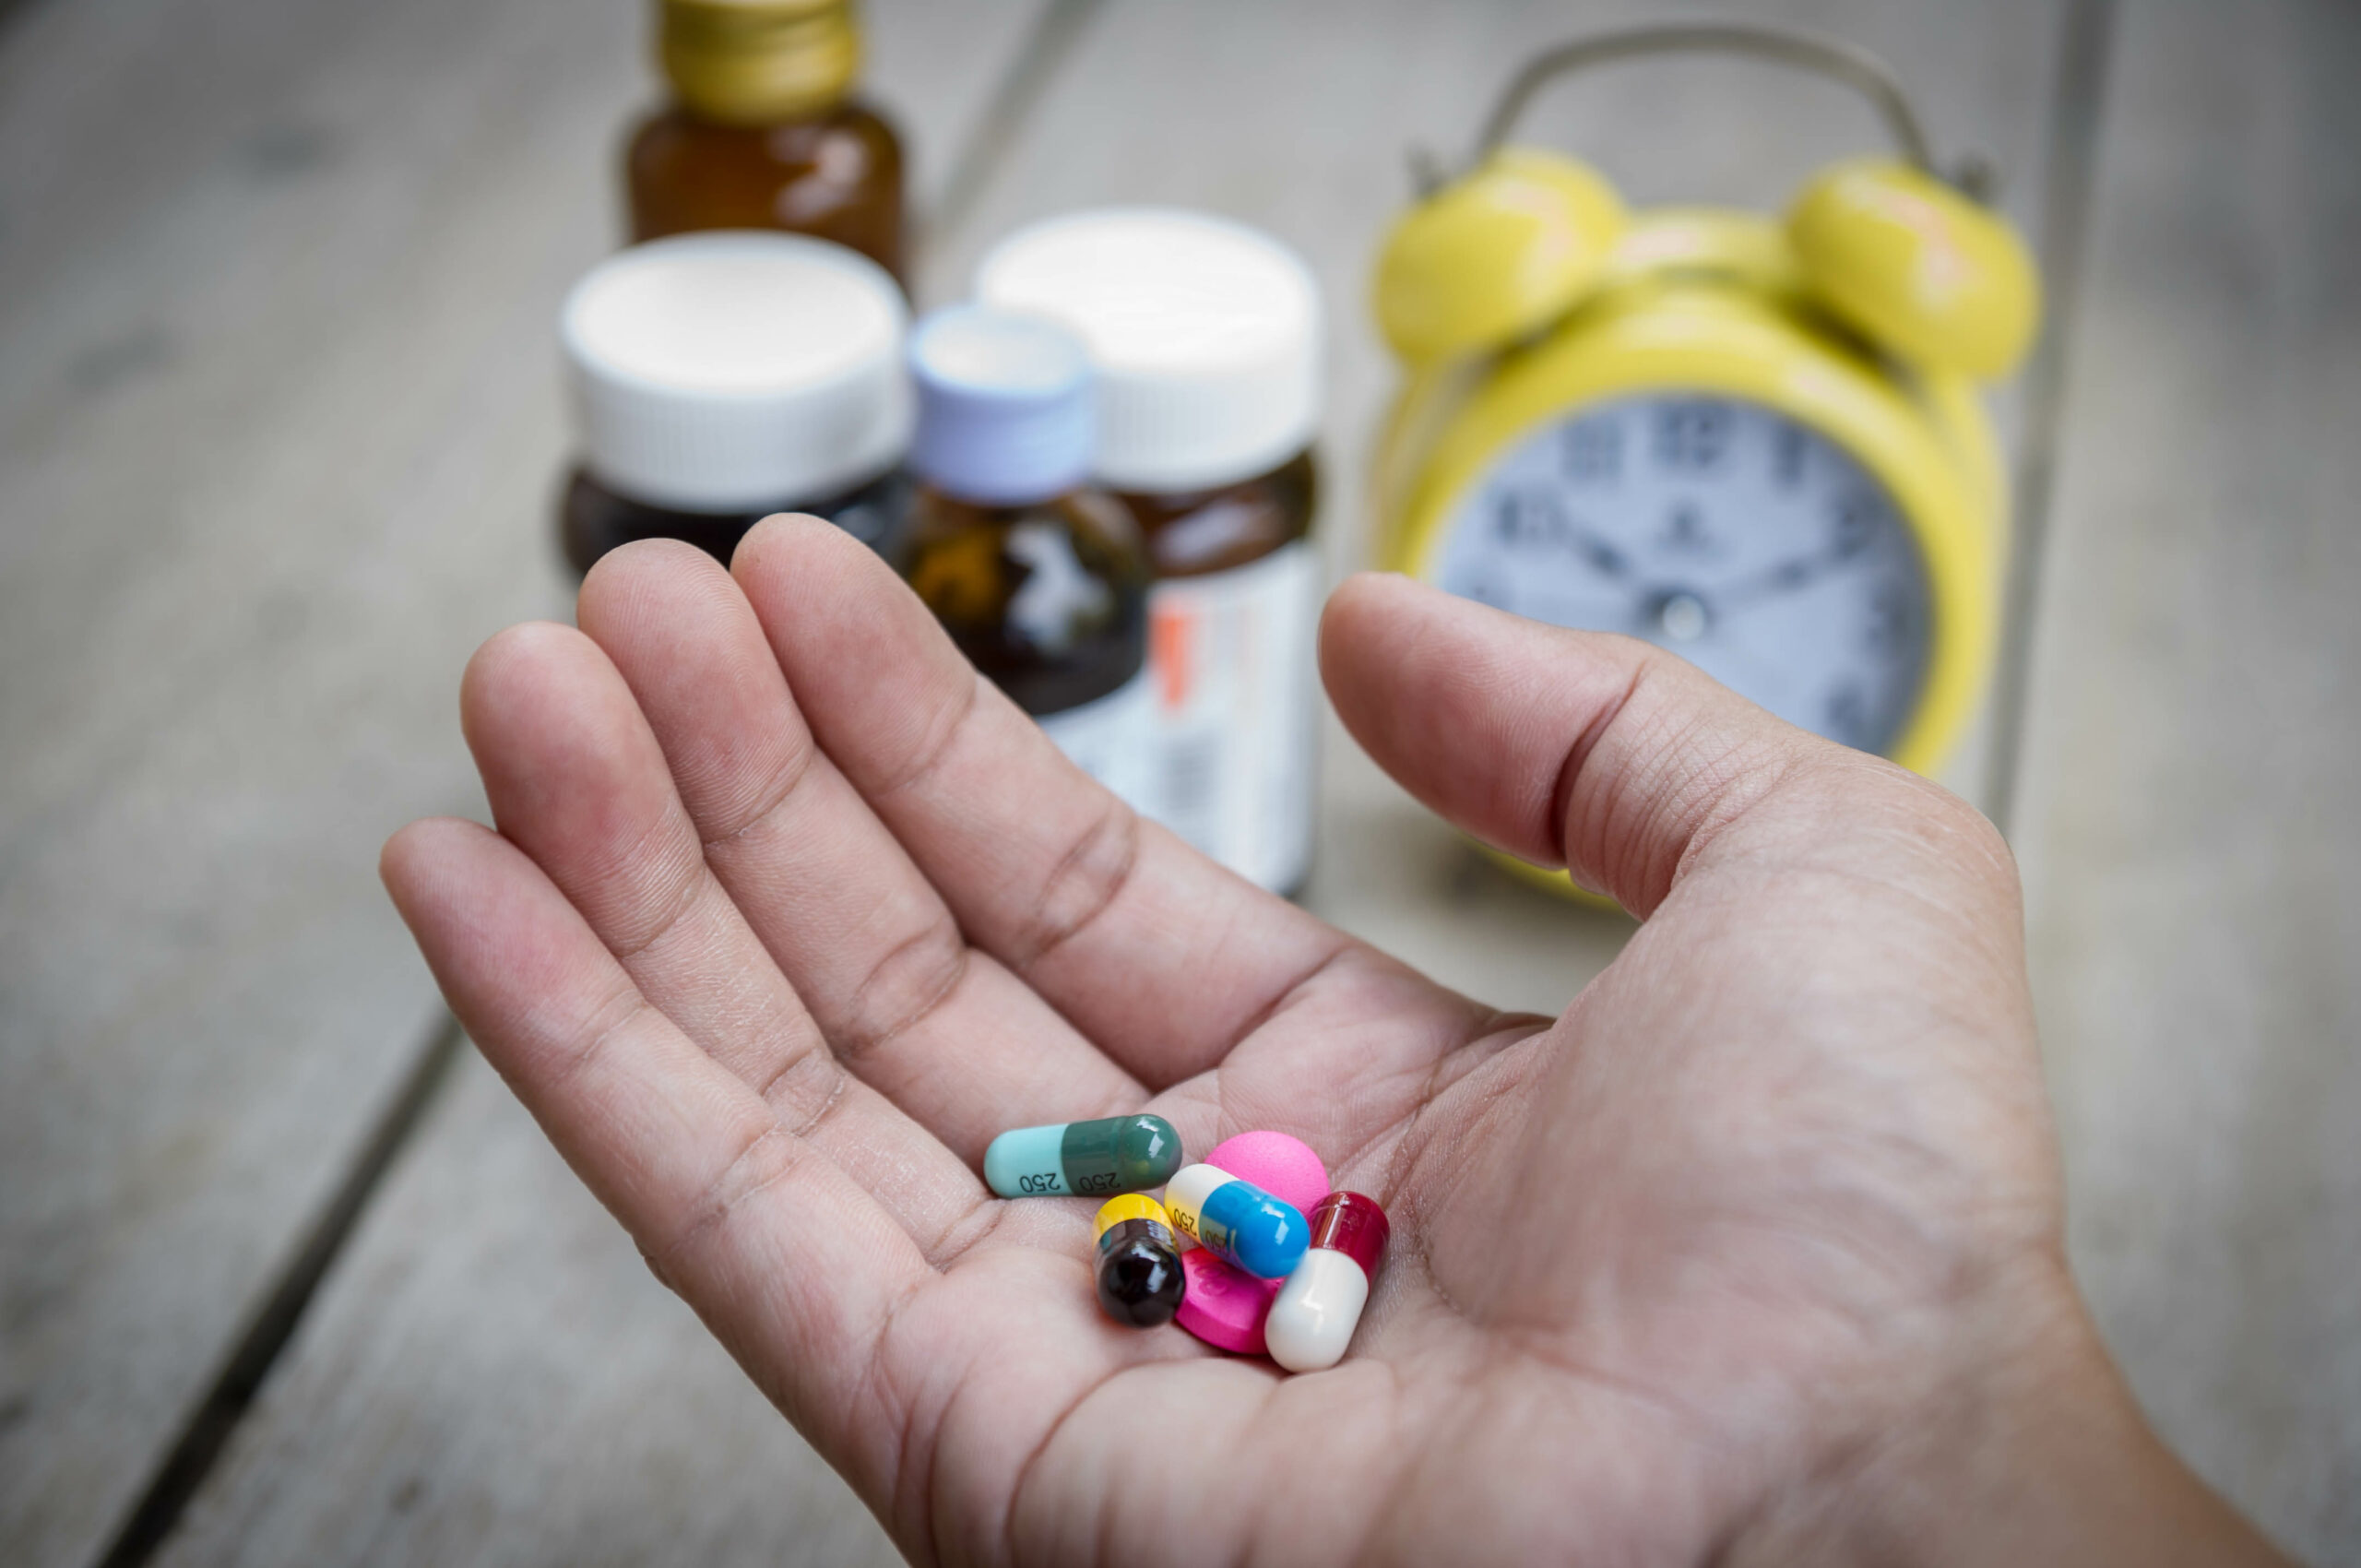 Dangerous Effects of Too Many Vitamins, Says MD